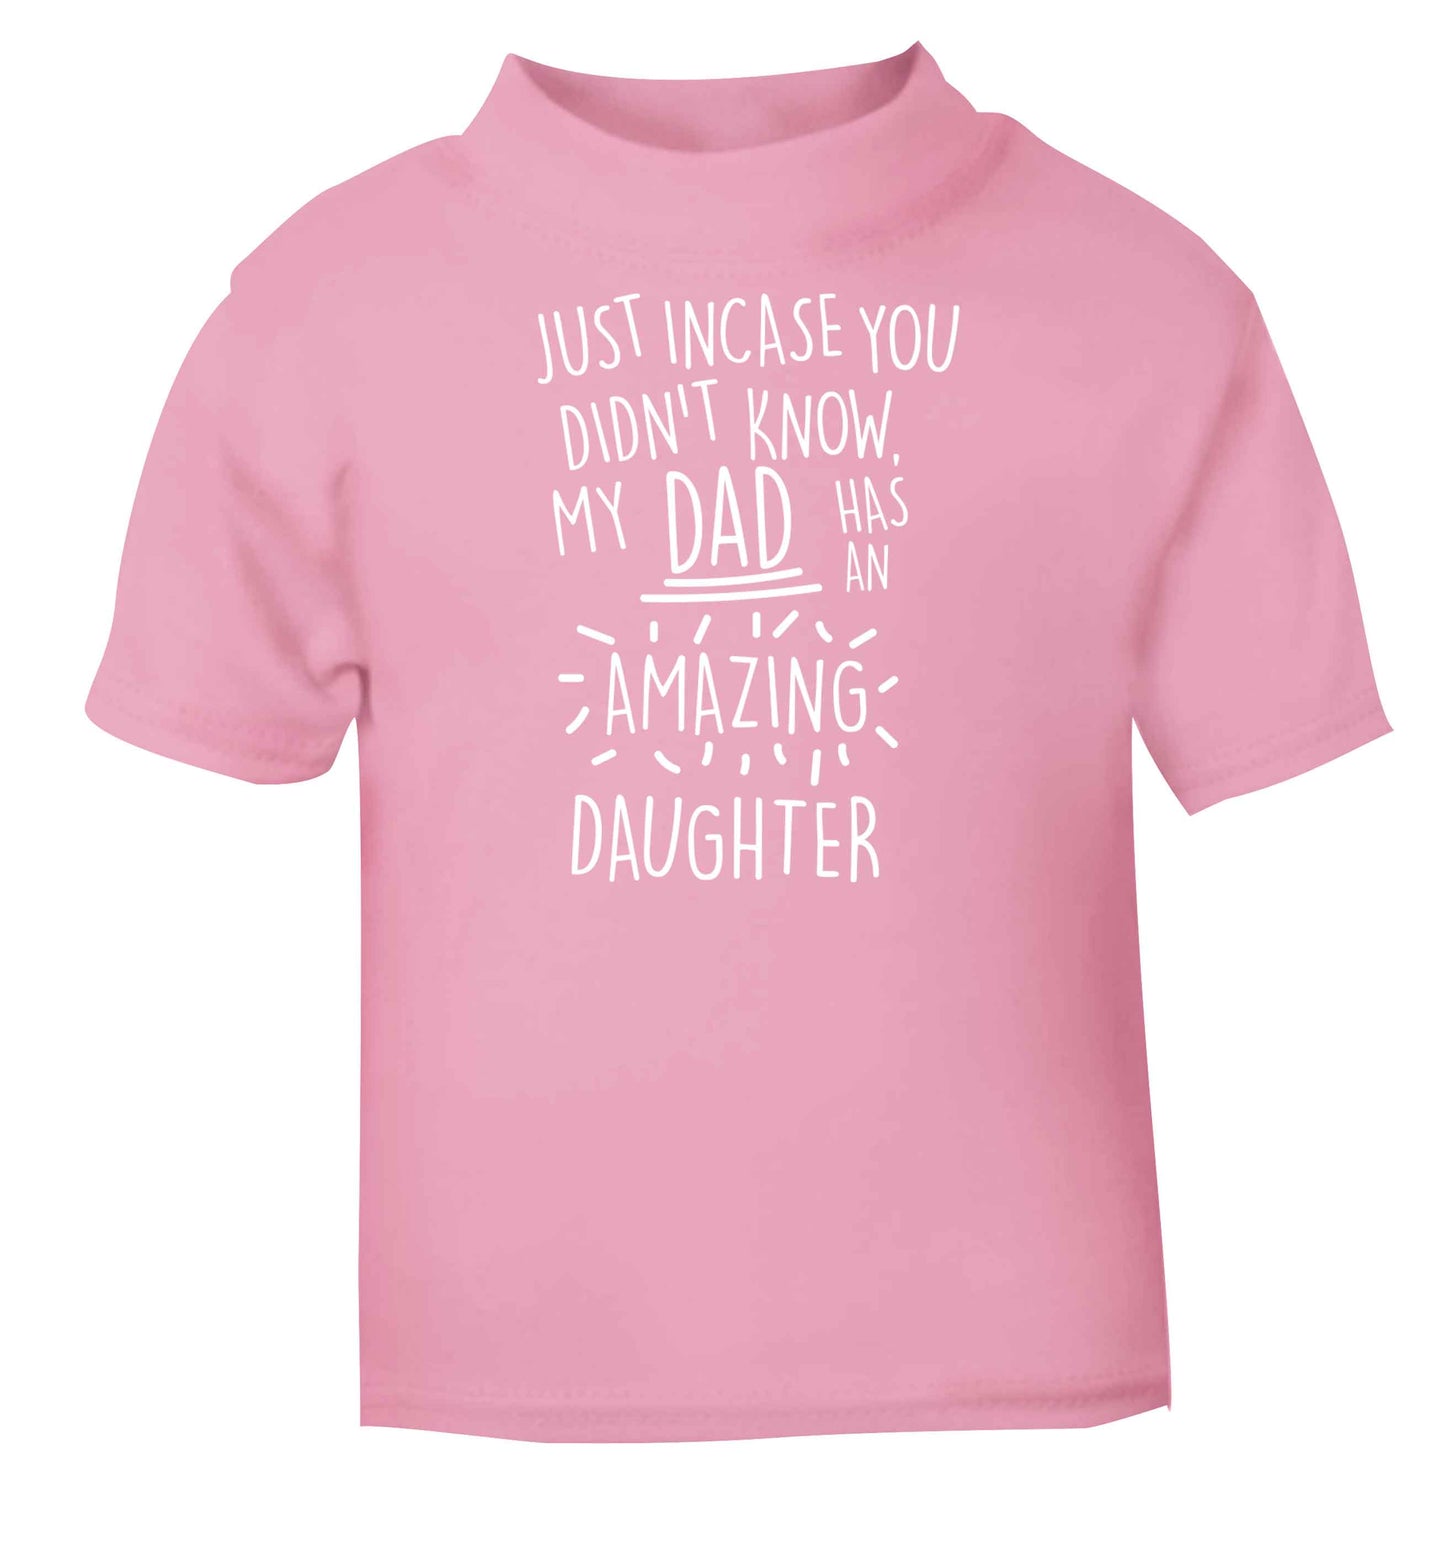 Just incase you didn't know my dad has an amazing daughter light pink baby toddler Tshirt 2 Years